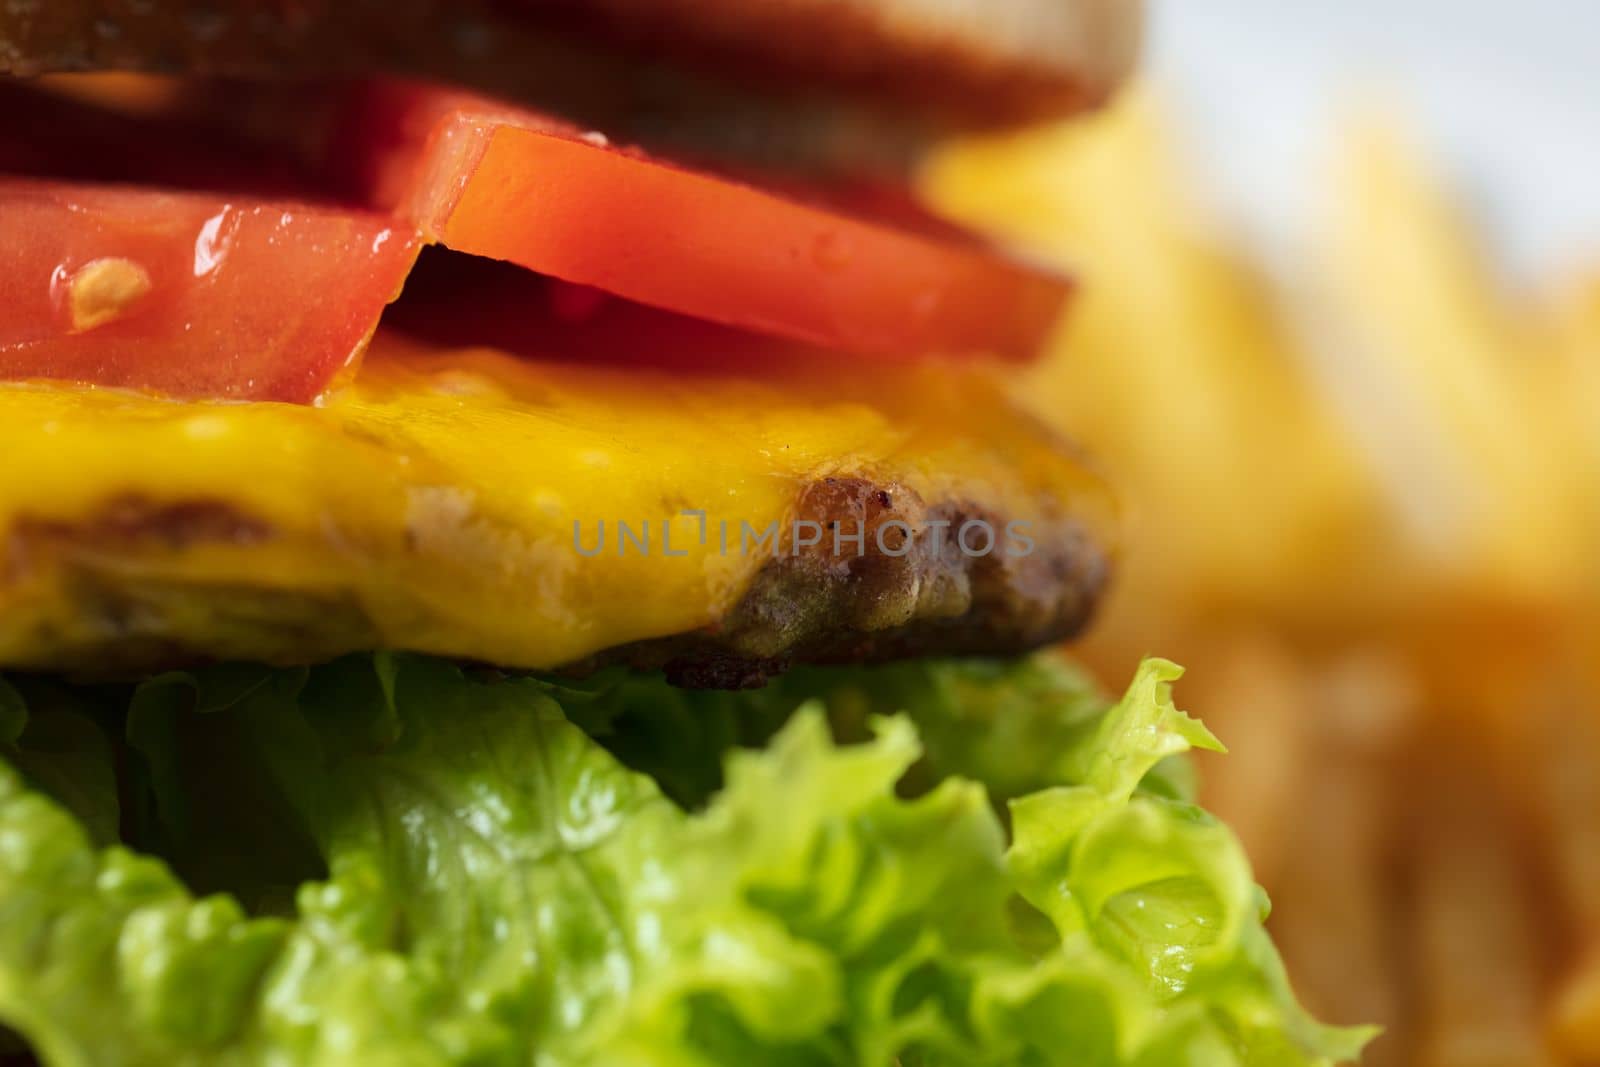 Cheeseburger with tomato and lettuce . High quality photo